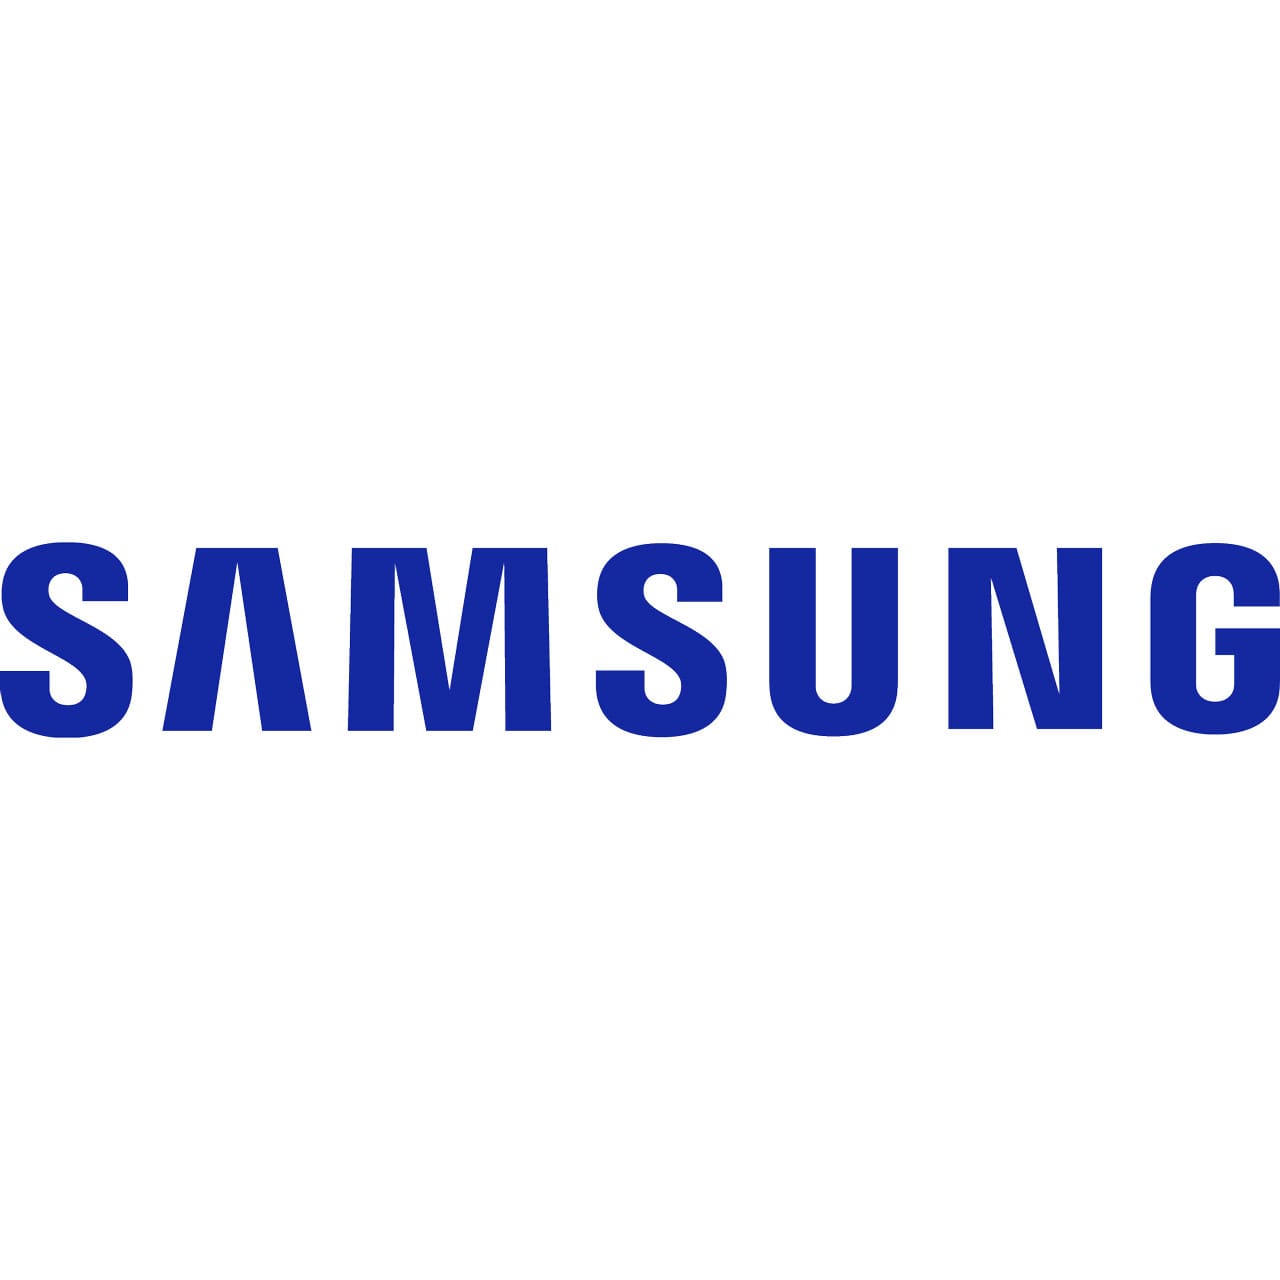 Samsung Surveillance Logo - Business Solutions, Services and Technology from Samsung